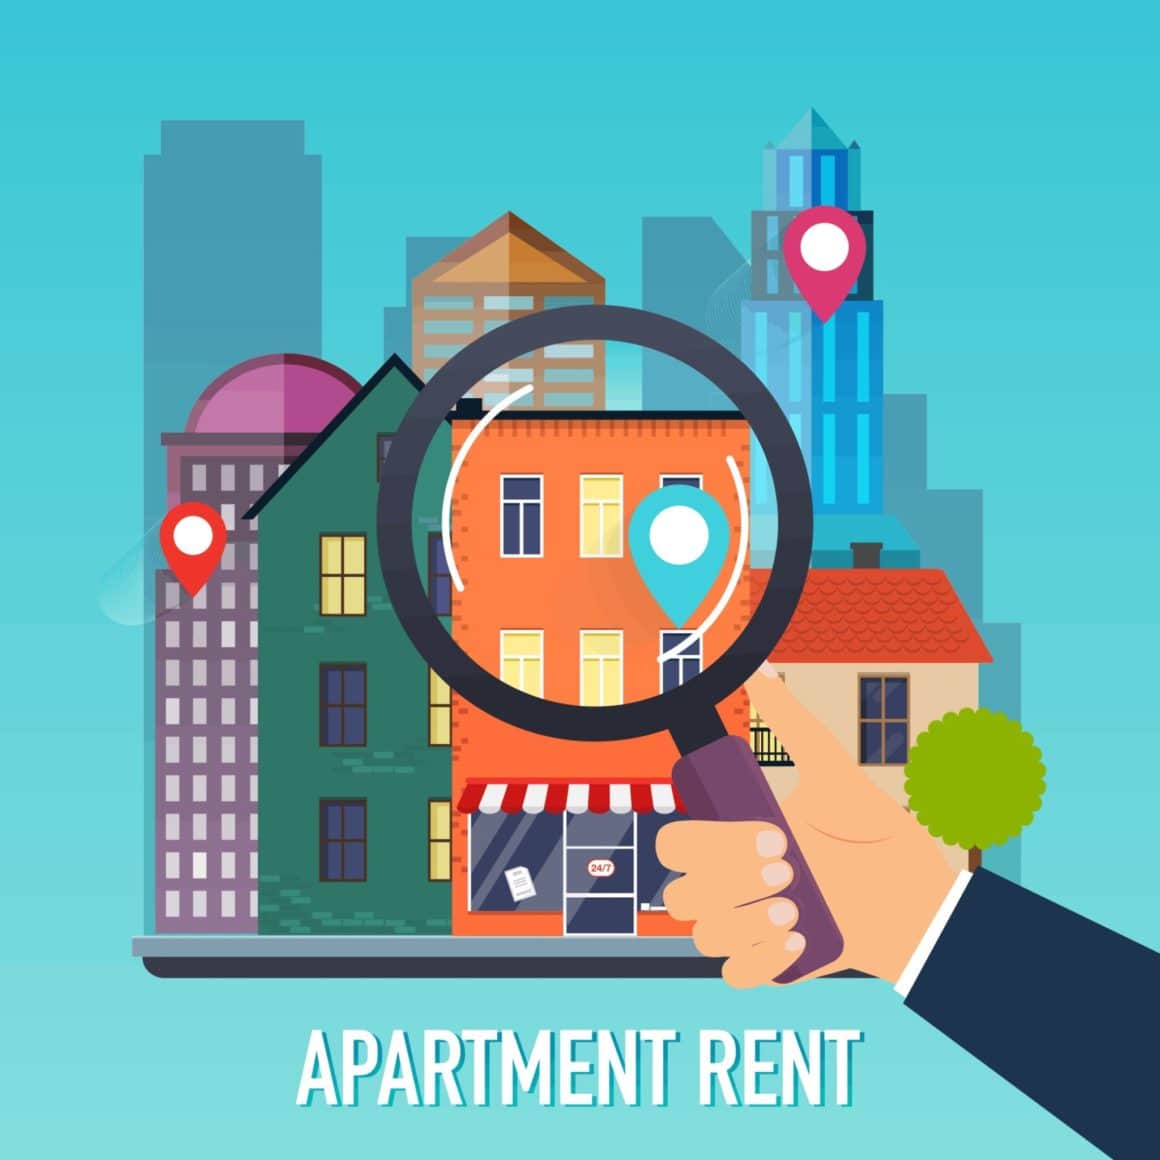 Rent Hikes in for NYC Apartments Slowing